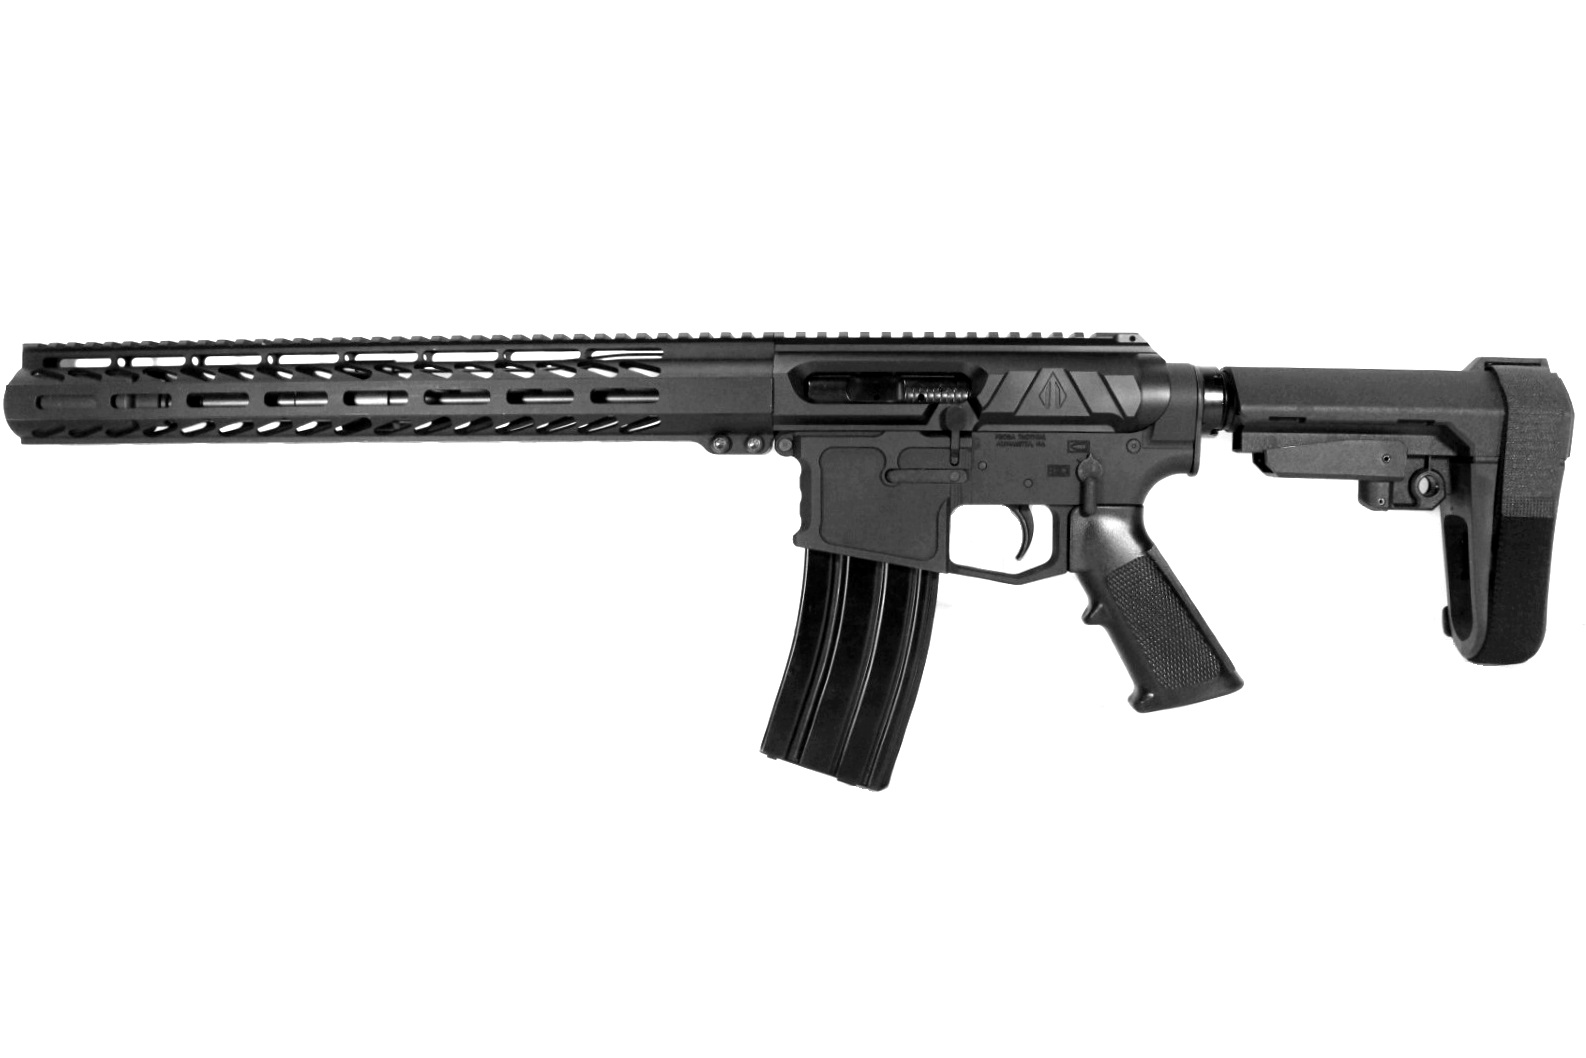 LEFT HAND 12.5 inch 5.56 NATO M-LOK Side Charging AR-15 Pistol By Pro2a Tactical